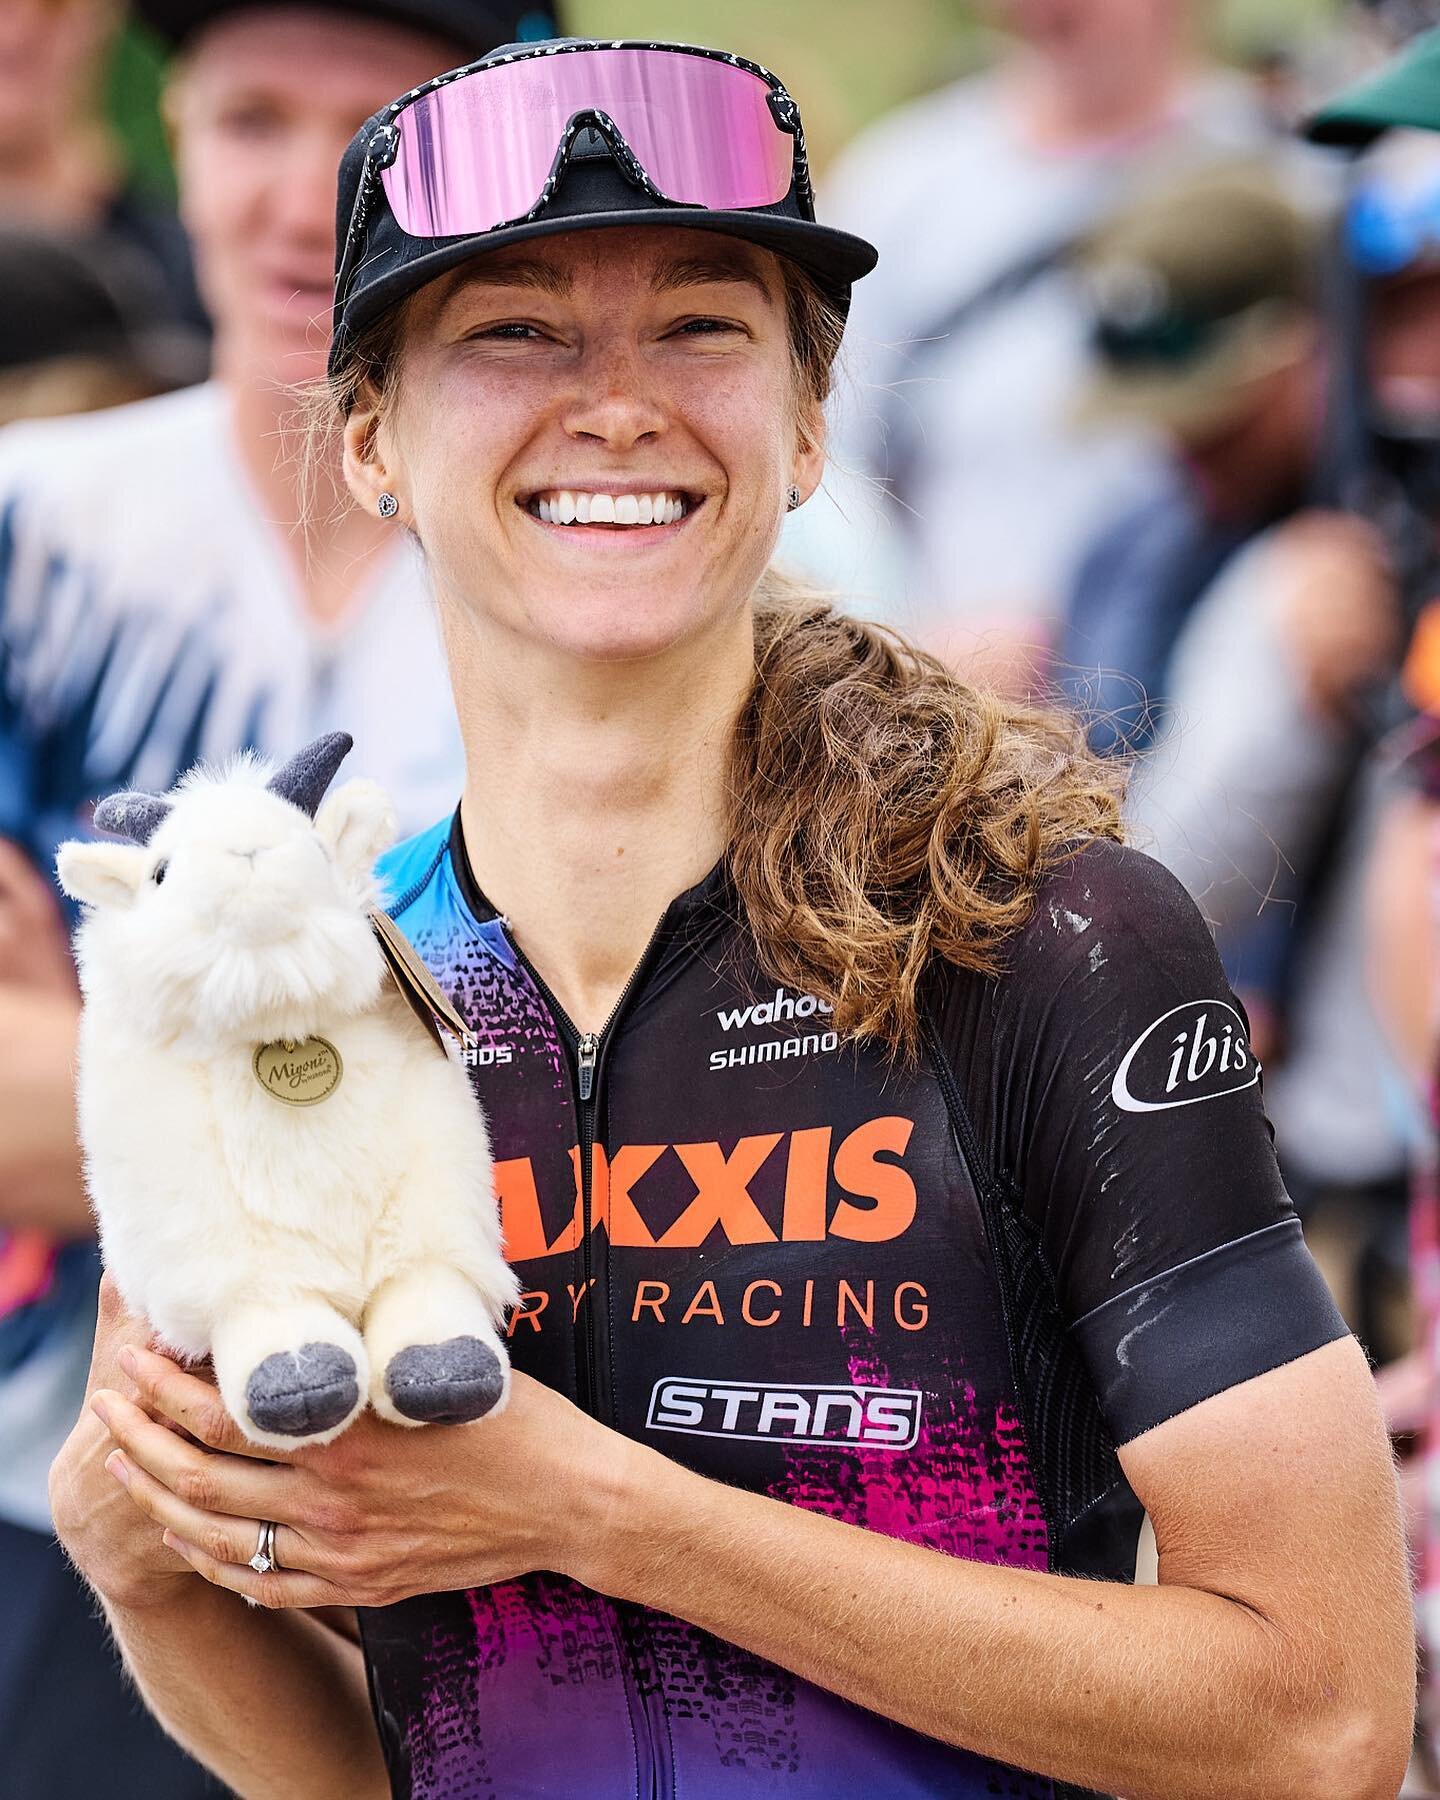 Always a great weekend when things go just as you&rsquo;d hoped. Lespy and Haley both had great rides yesterday at @tusharcrusher 

Lespy crossed the line in 6th and Haley had a phenomenal ride to take the win! A hard day for everyone out on course, 